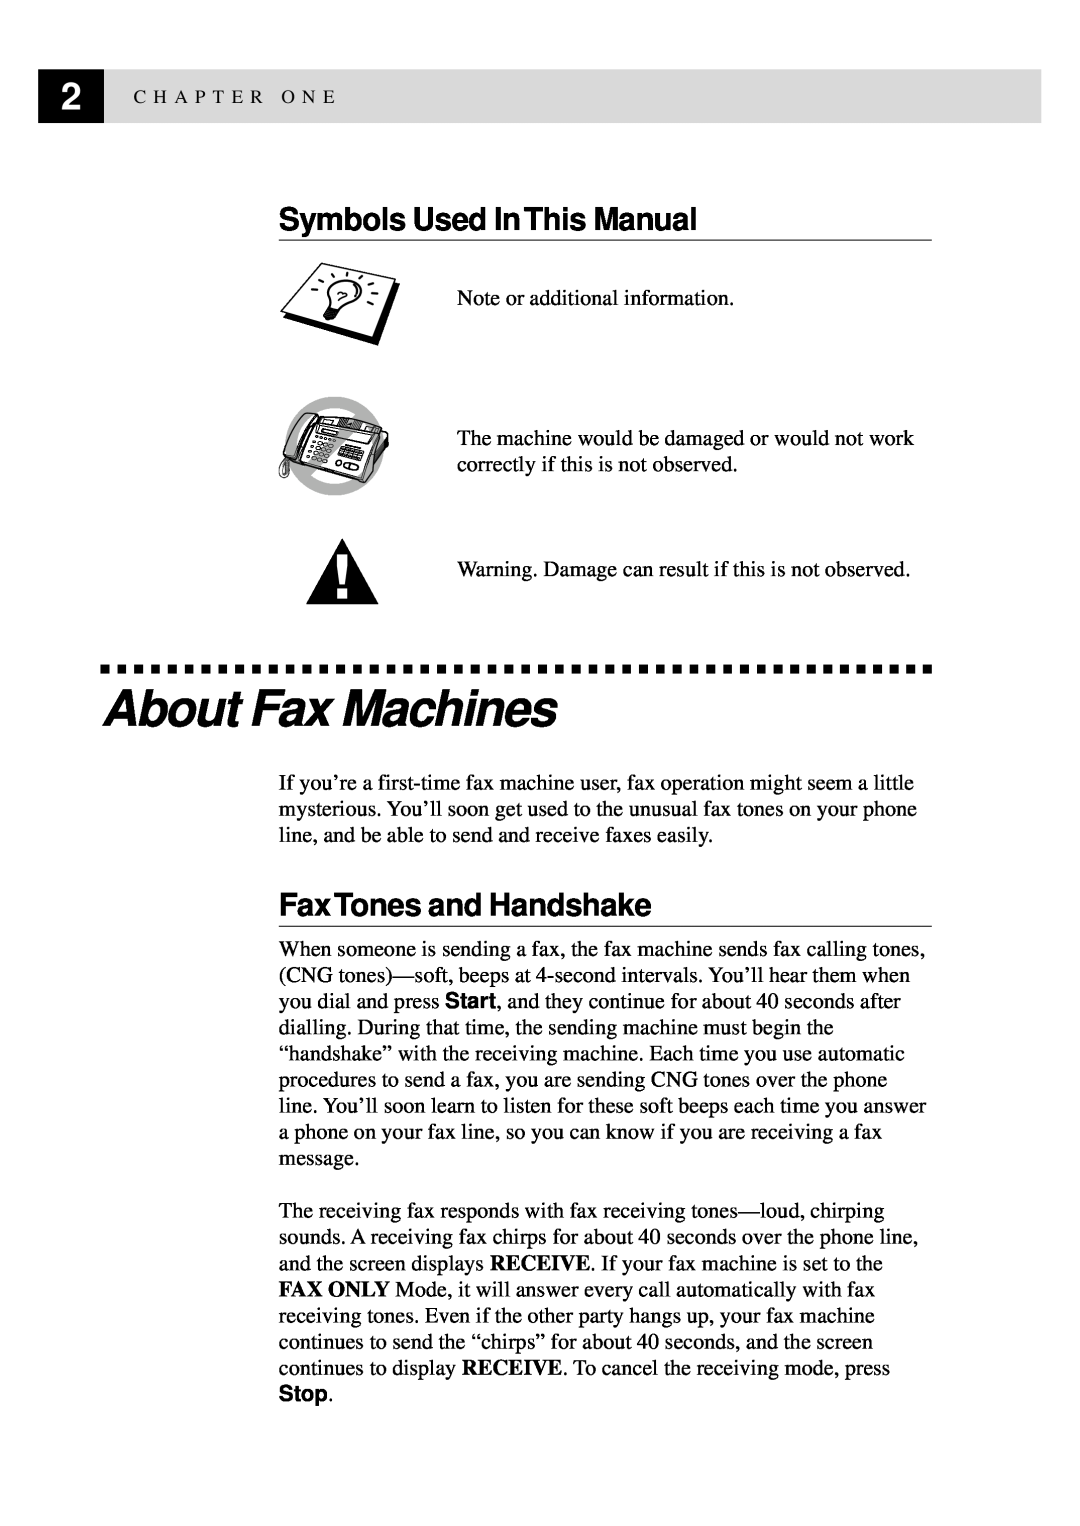 Brother 515 manual About Fax Machines, Symbols Used In This Manual, Fax Tones and Handshake 